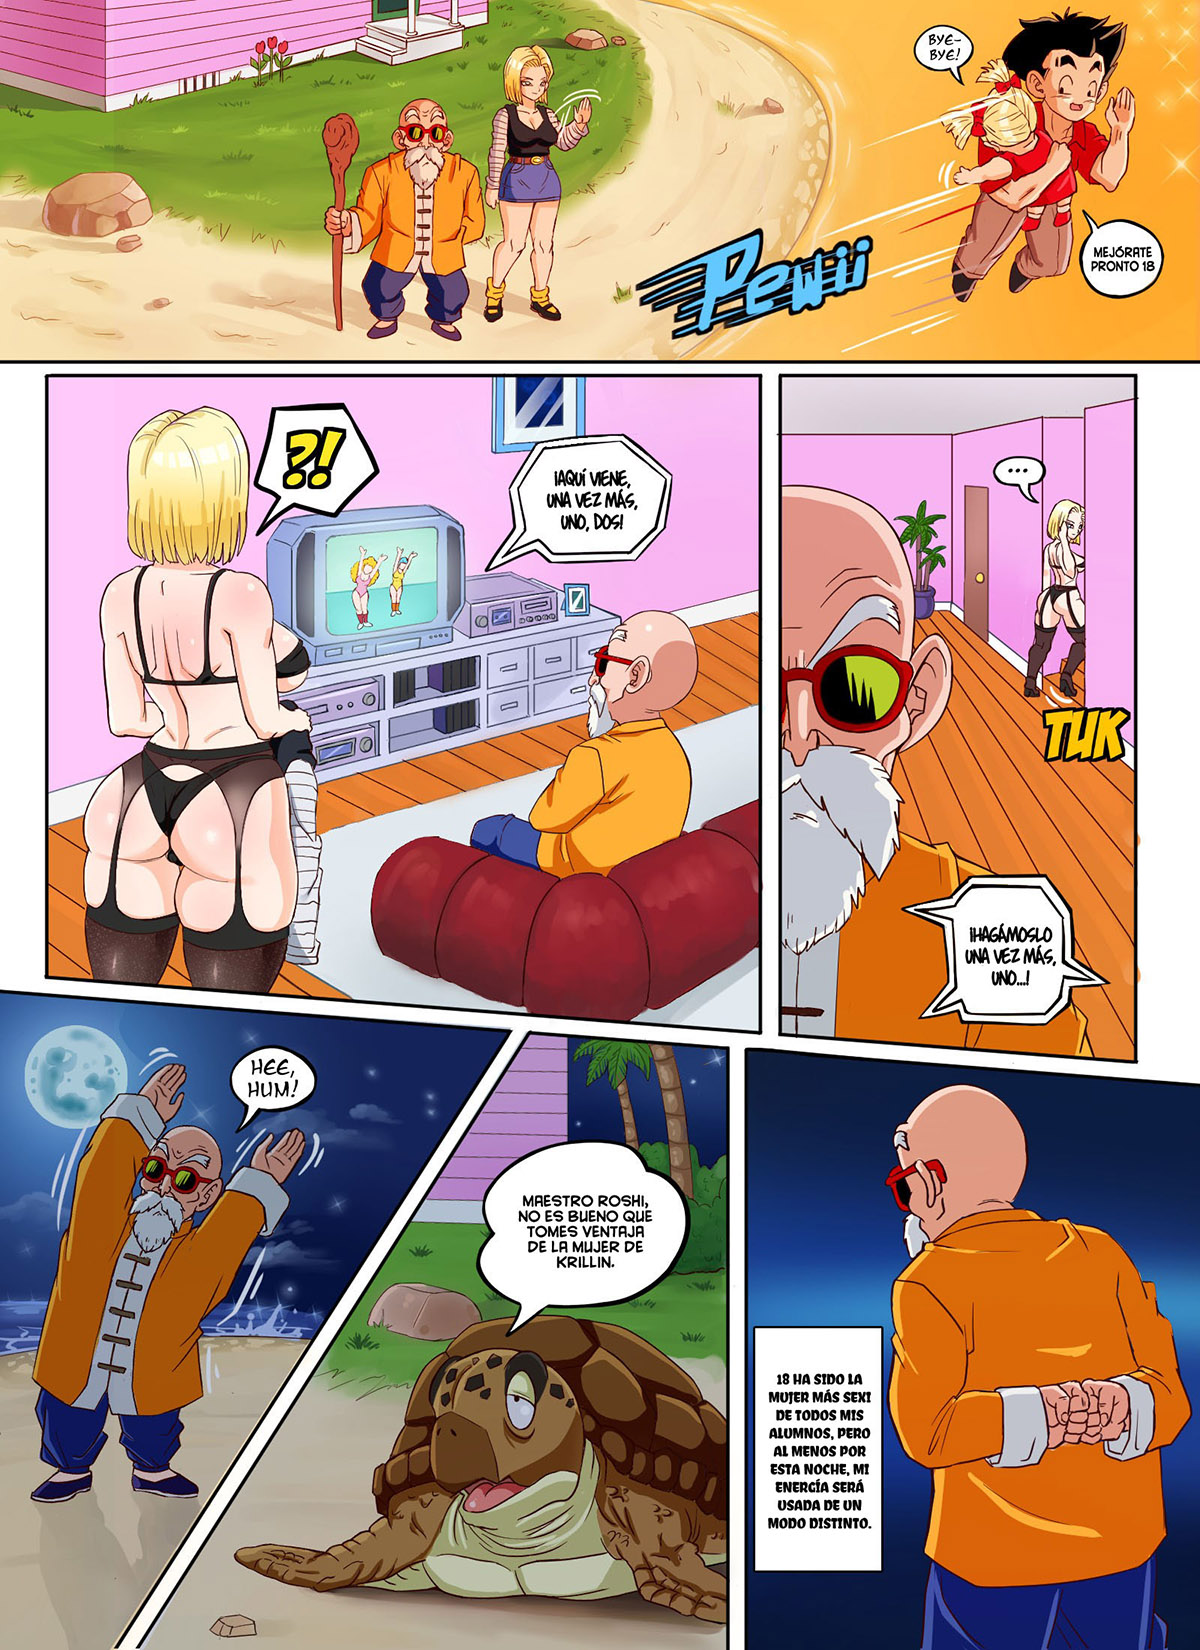 ANDROID 18 x ROSHI